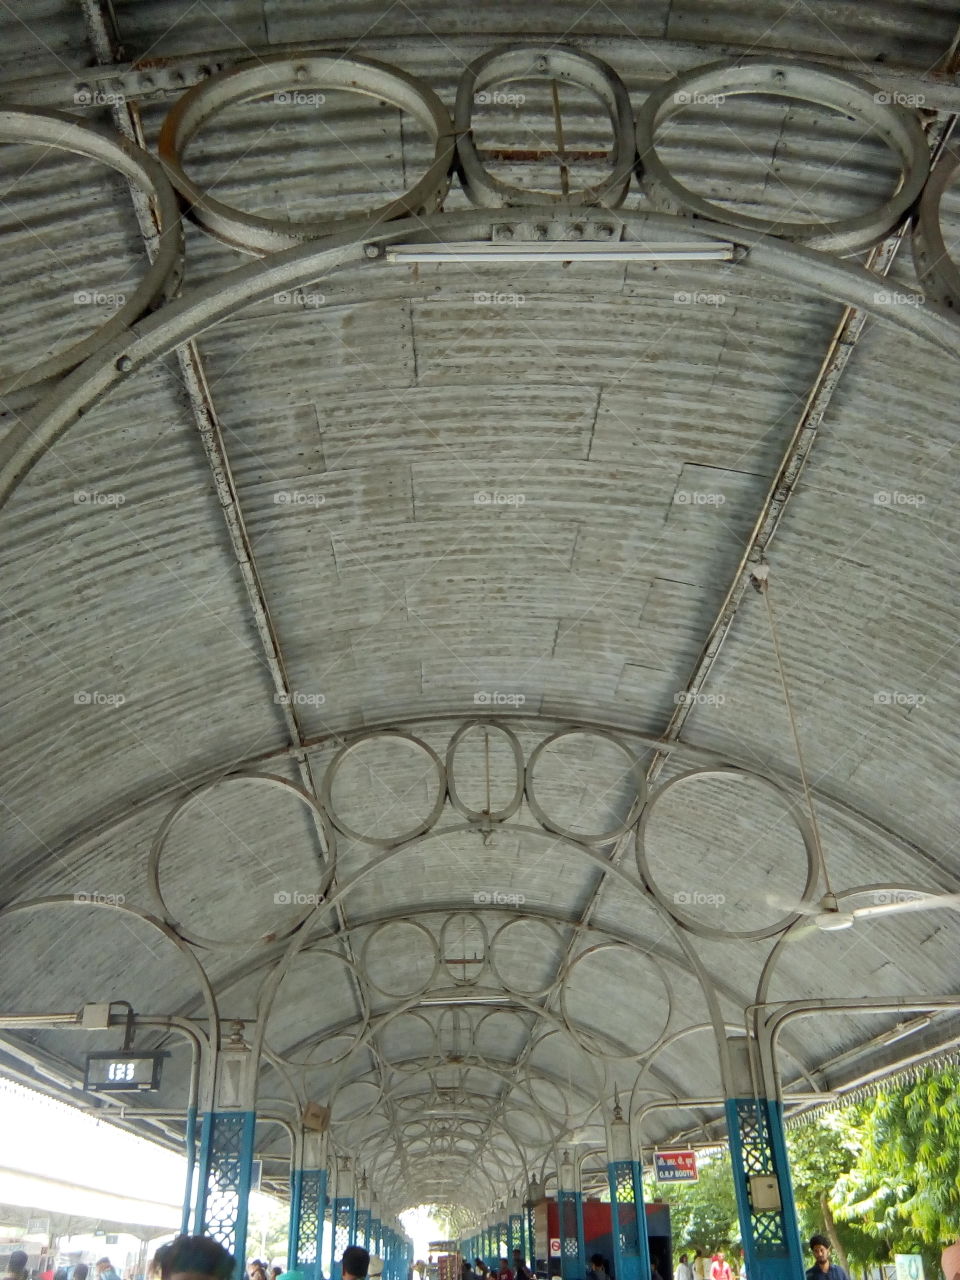 design of ceiling of railway station city Patiala. A historical city in India.